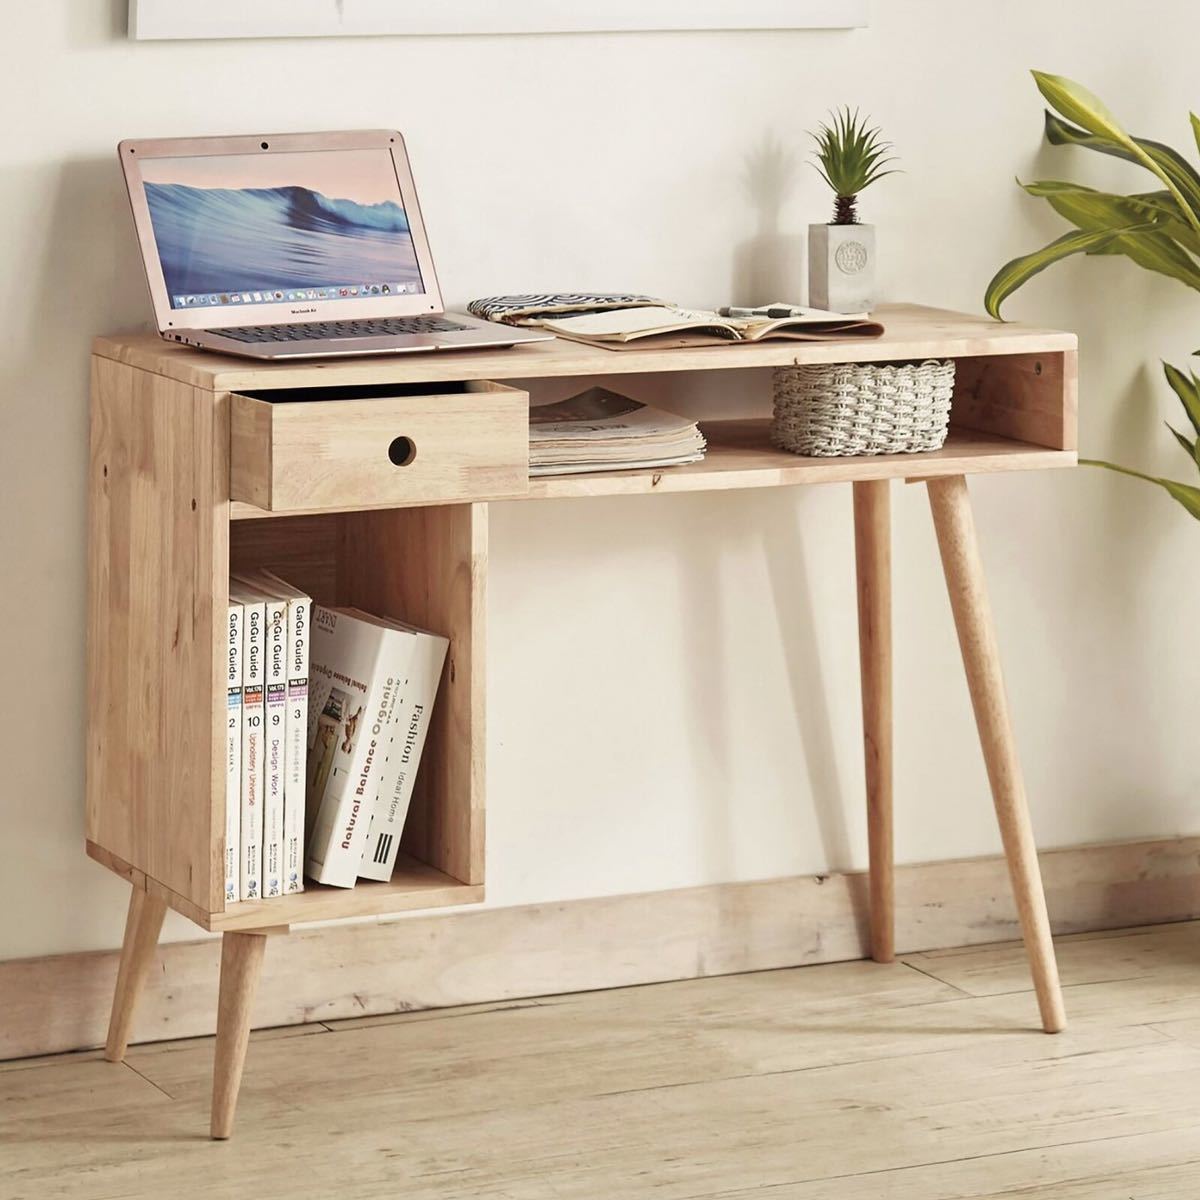 [ free shipping ] Northern Europe Raver wood made with a tier of drawers on one side desk width 100 / wooden desk office desk computer desk PC desk office work desk natural purity natural tree 